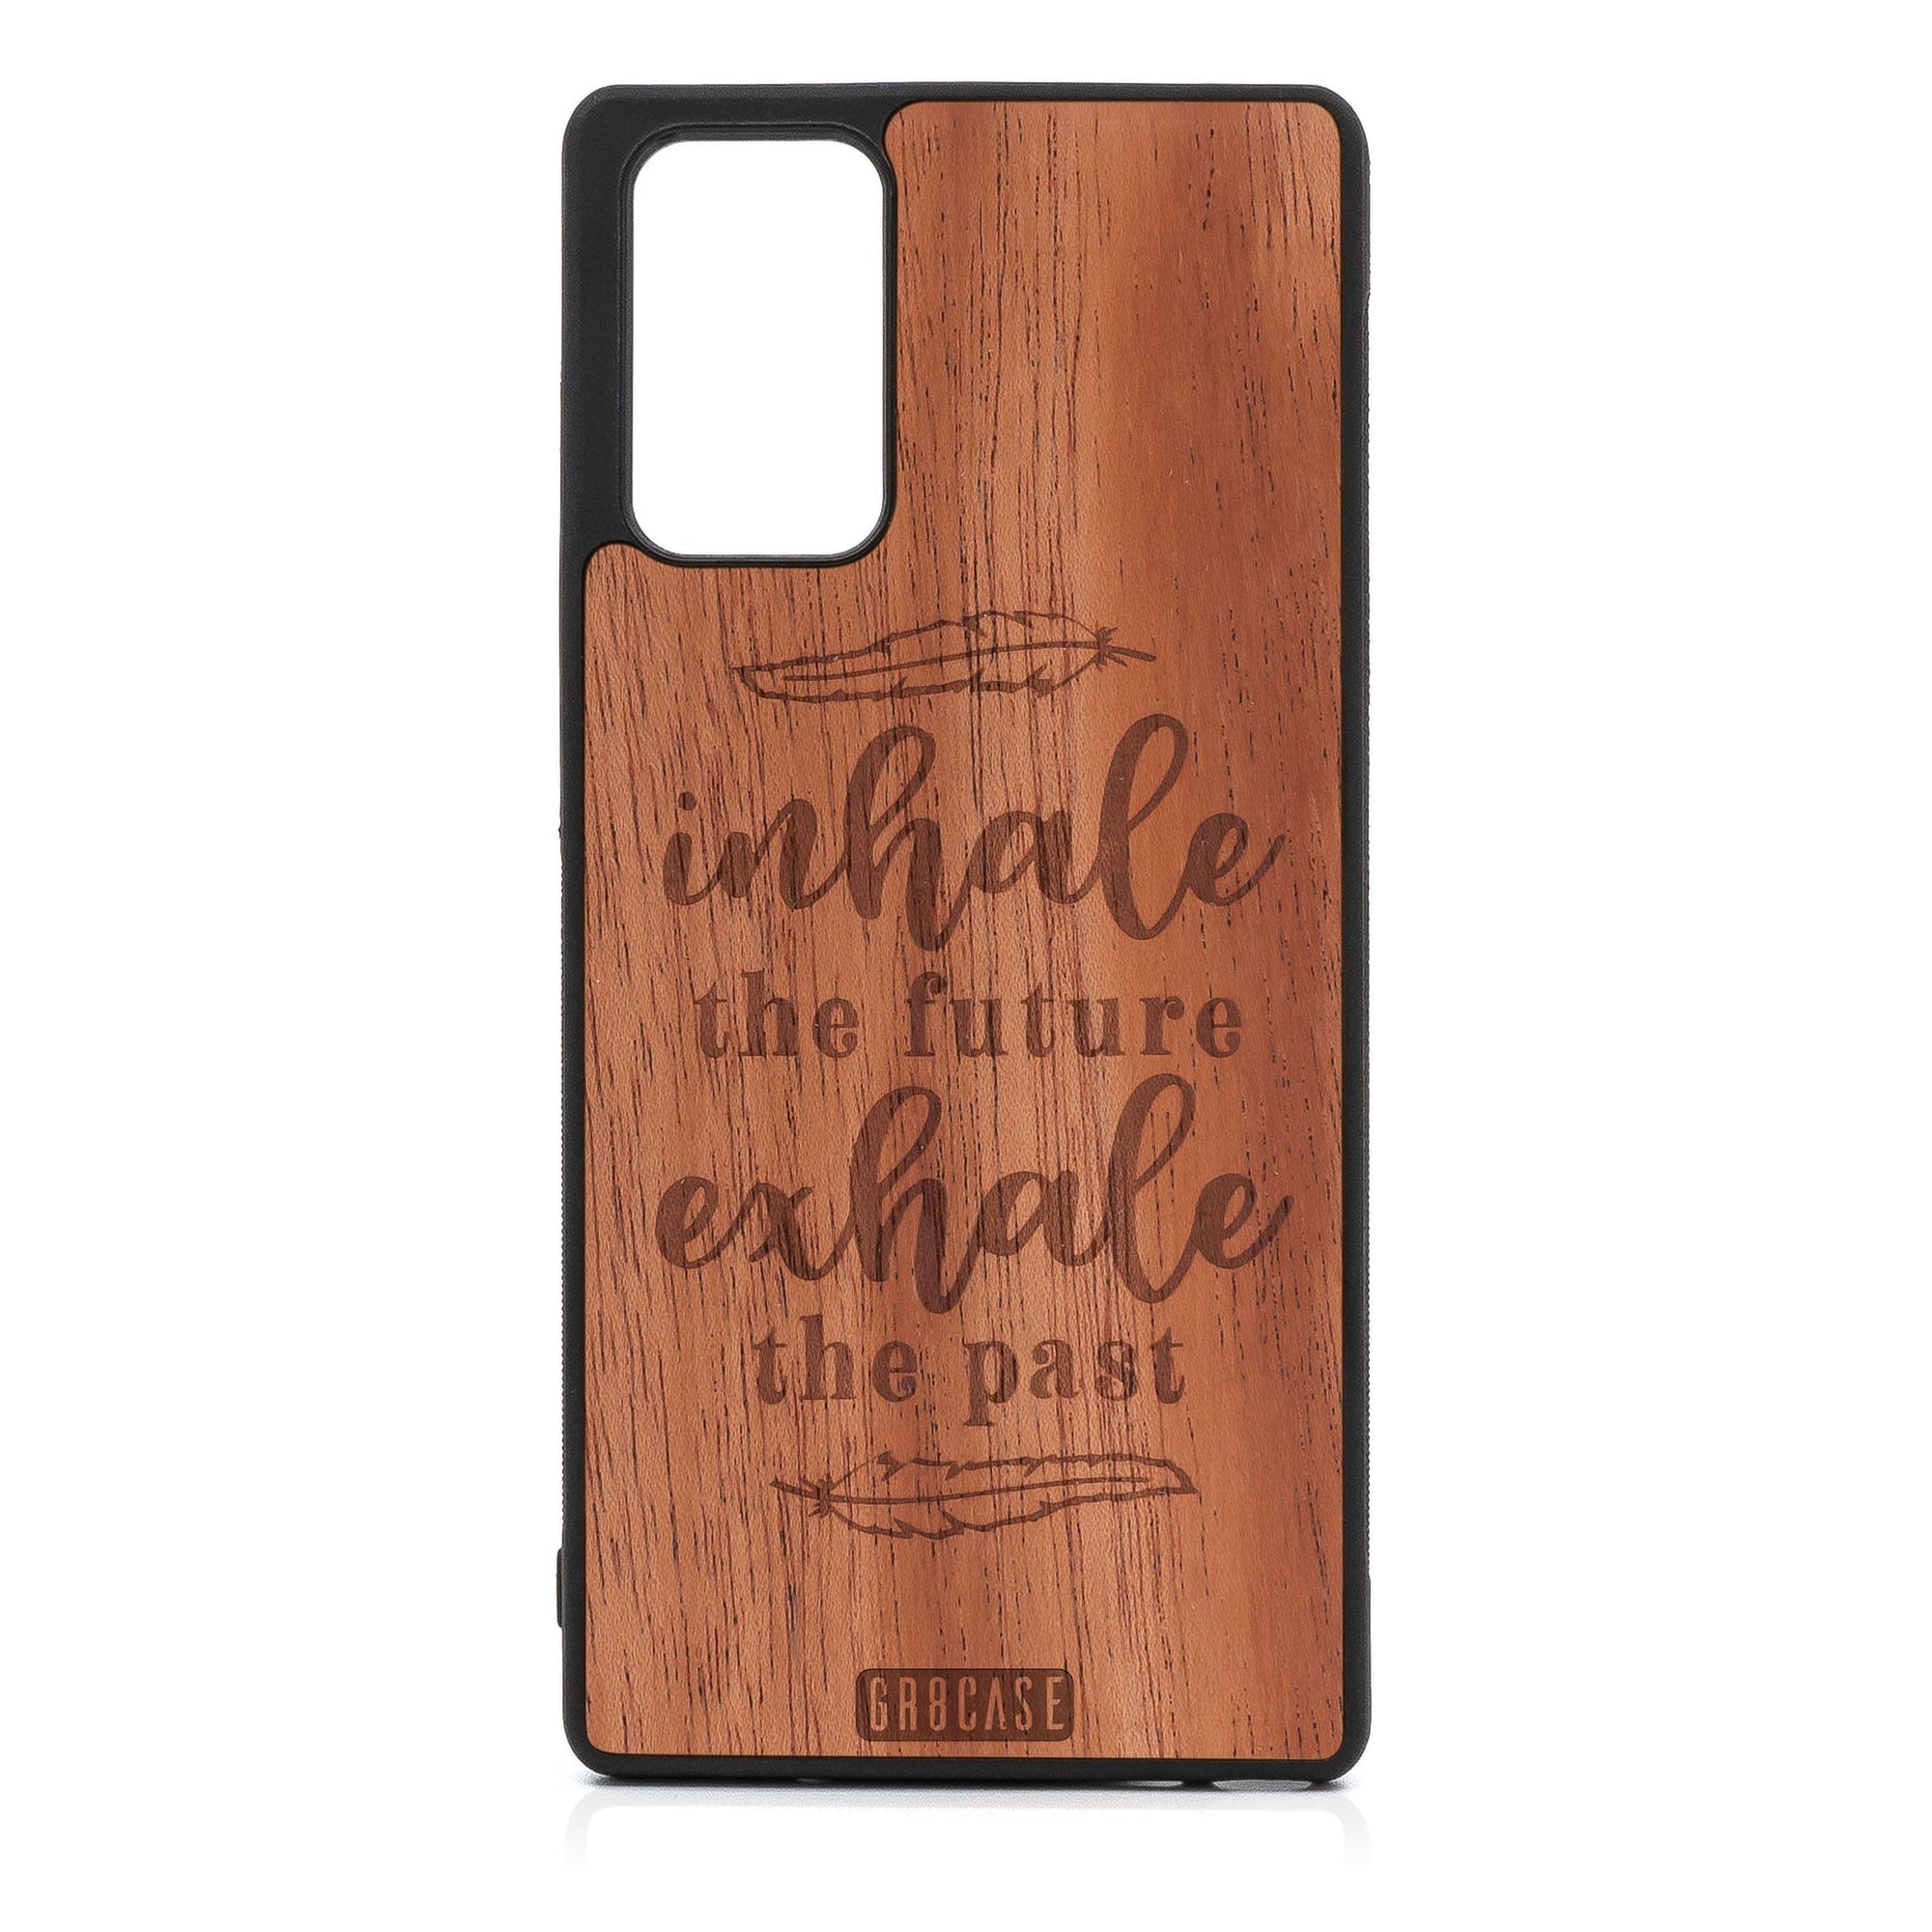 Inhale The Future Exhale The Past Design Wood Case For Samsung Galaxy A33 5G